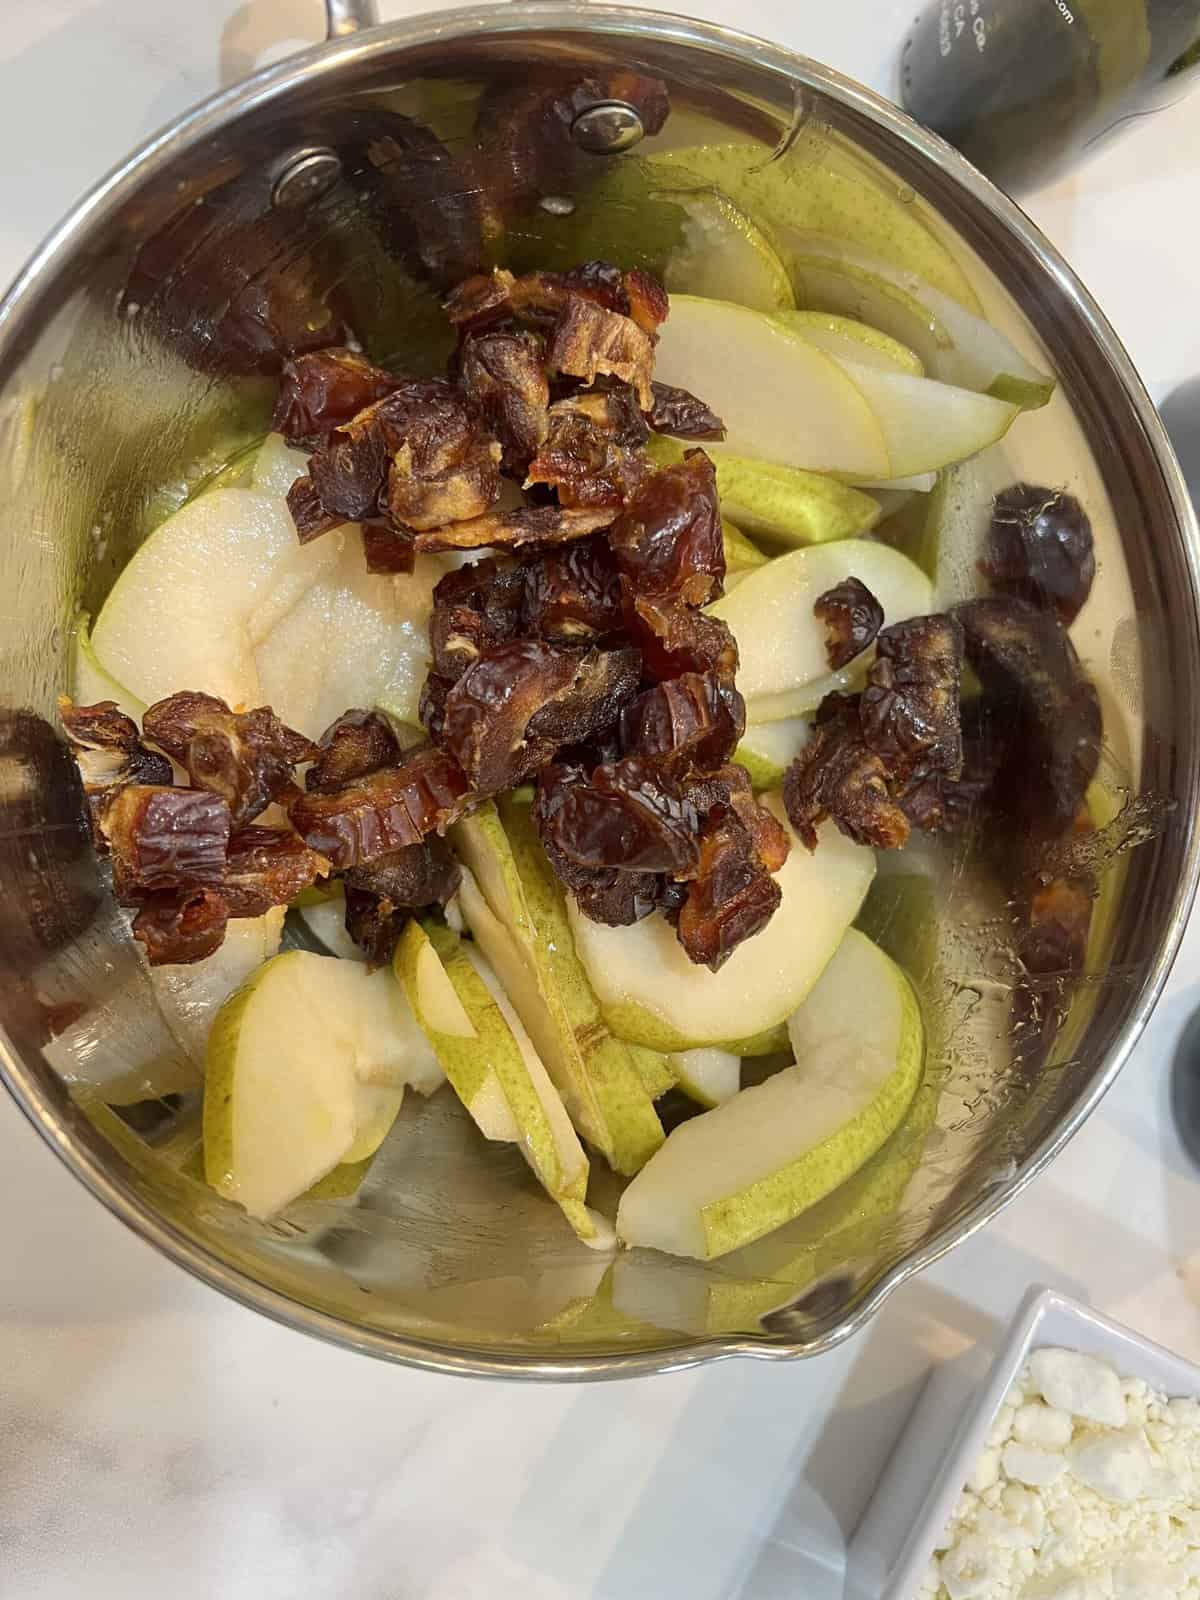 sliced pears and chopped dates in a metal bowl.